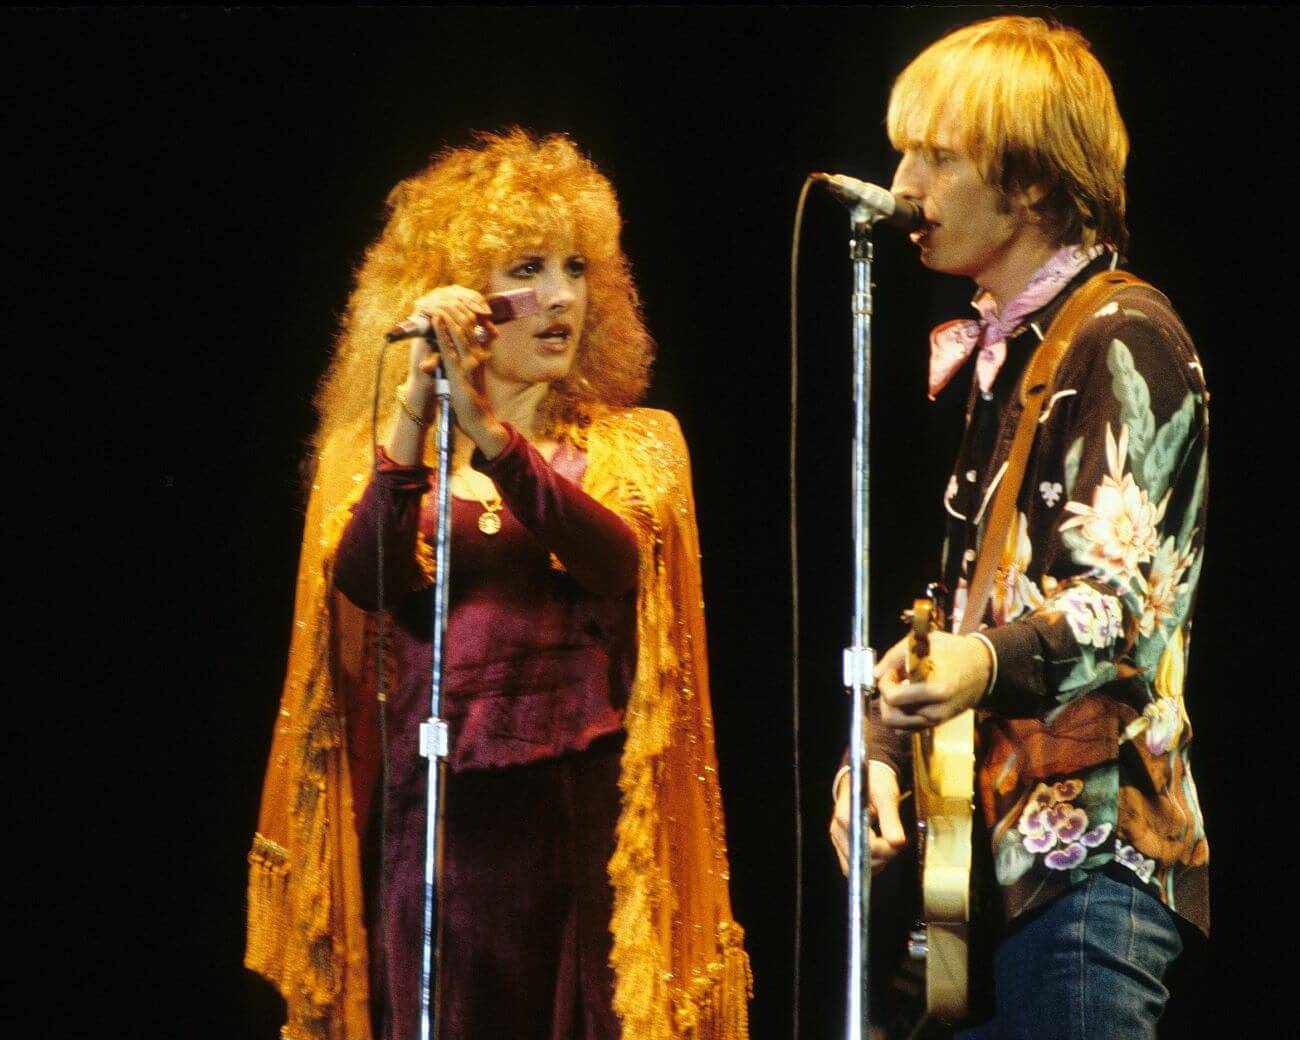 Stevie Nicks sings into a microphone while looking at Tom Petty, who plays guitar and sings into a microphone.